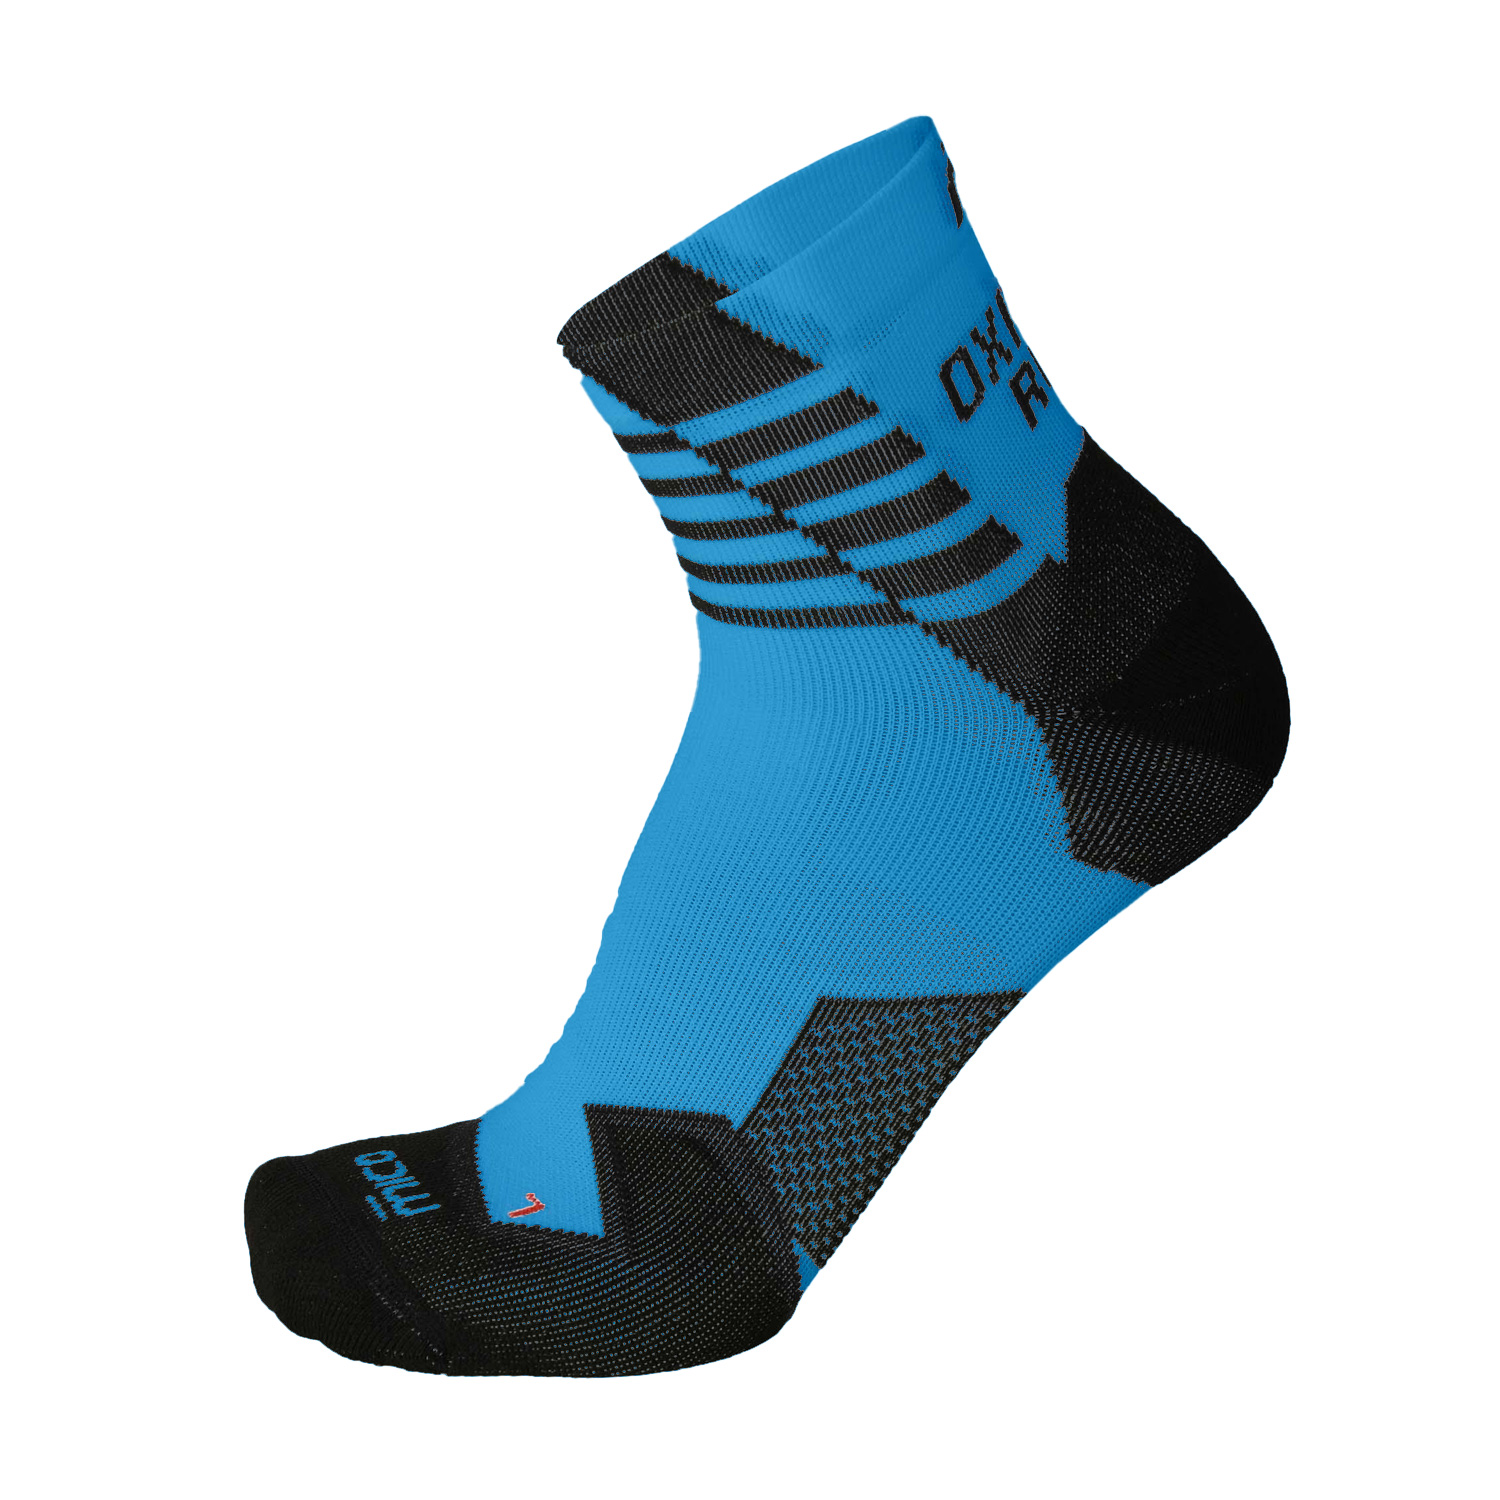 Mico Oxi-jet Light Weight Compression Calze - Turchese